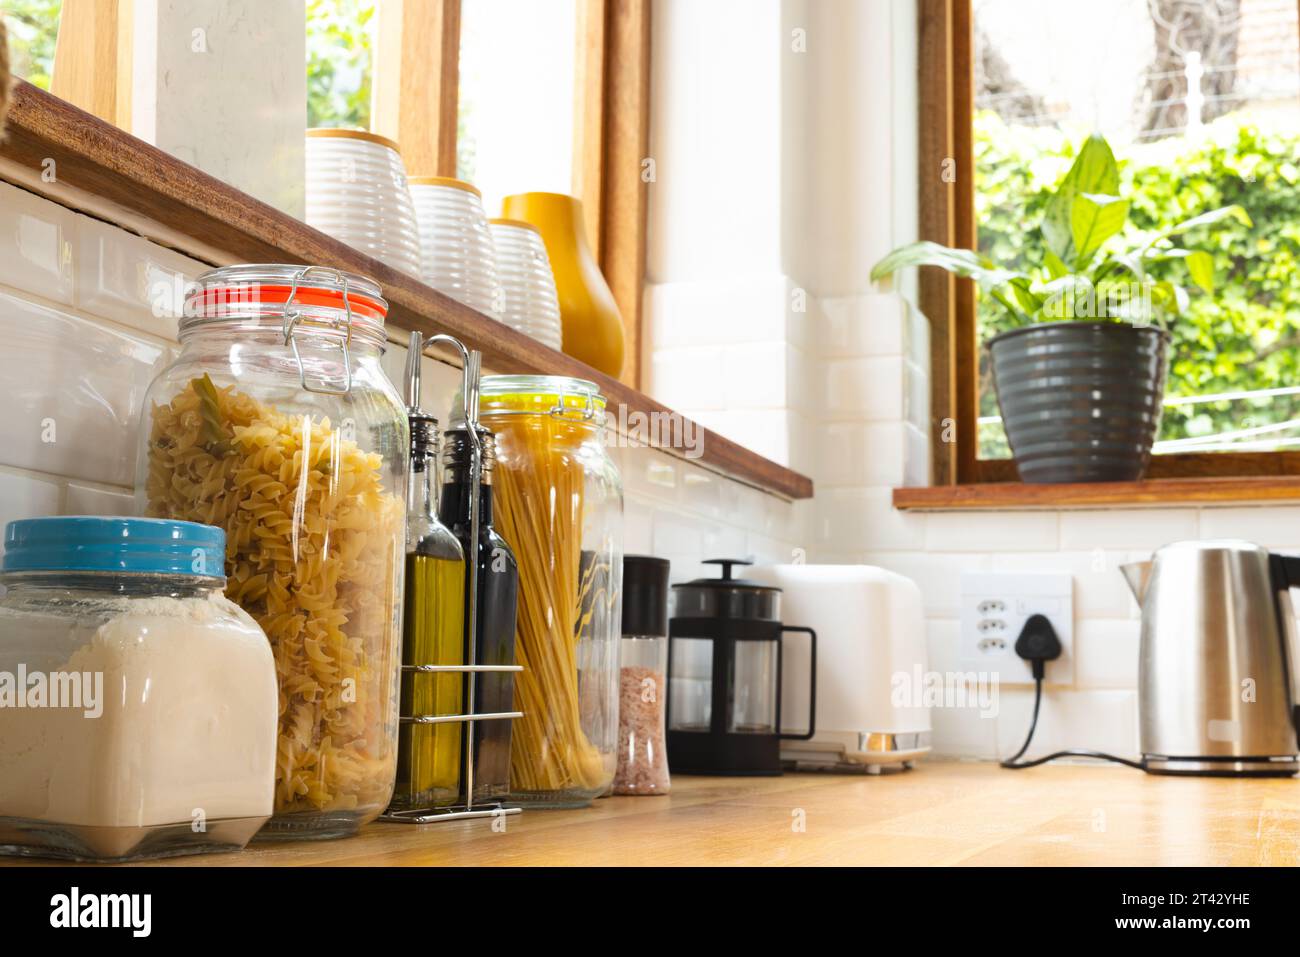 Food storage jars on windowsill and worktop, with plant and appliances in kitchen Stock Photo